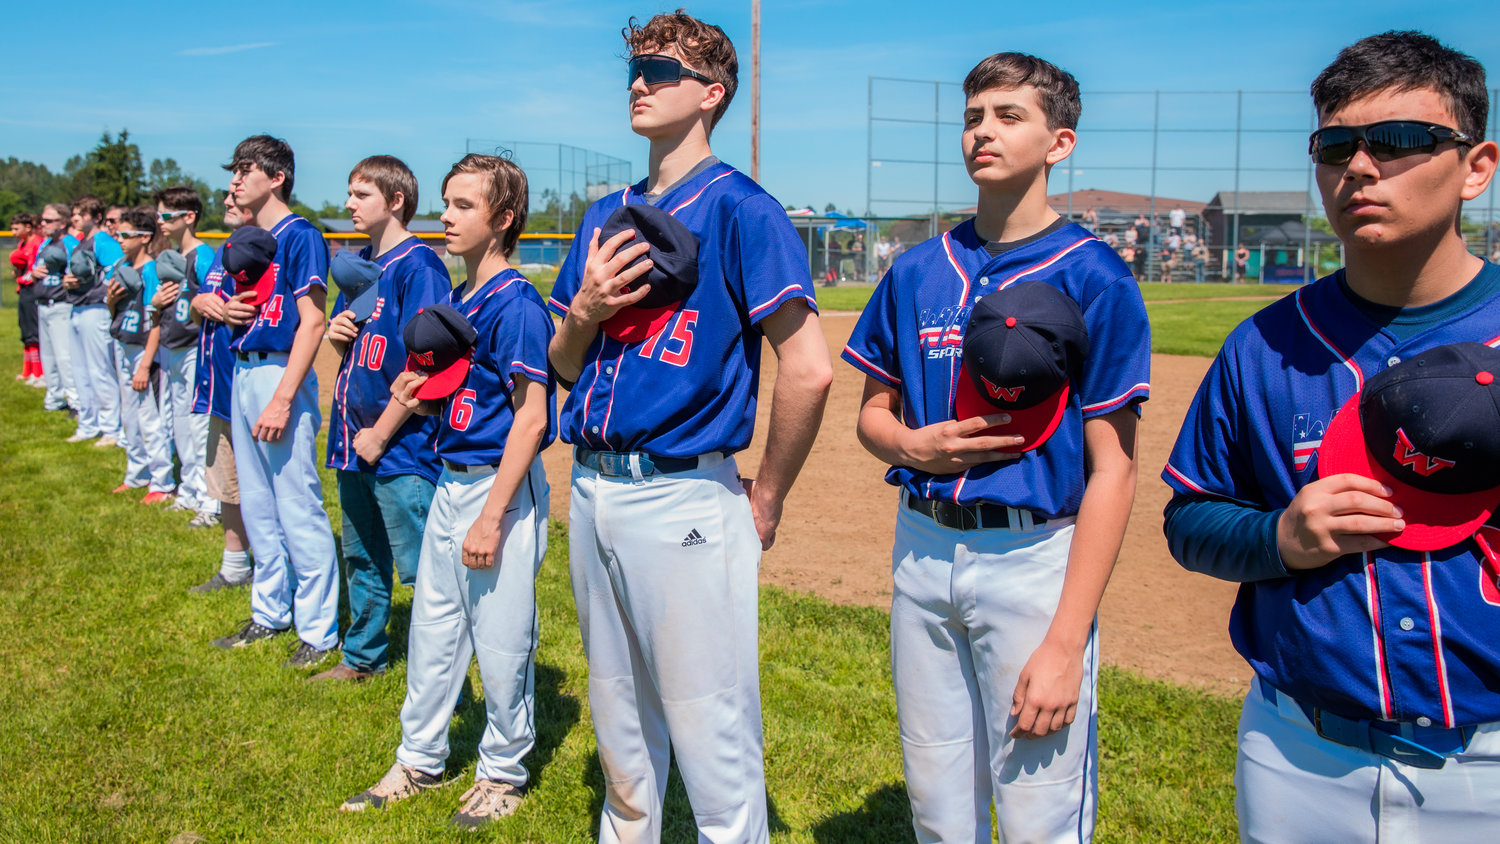 Players use caps to cover hearts as the national anthem plays at Stan Hedwall Park in Chehalis on Saturday for closing ceremonies.